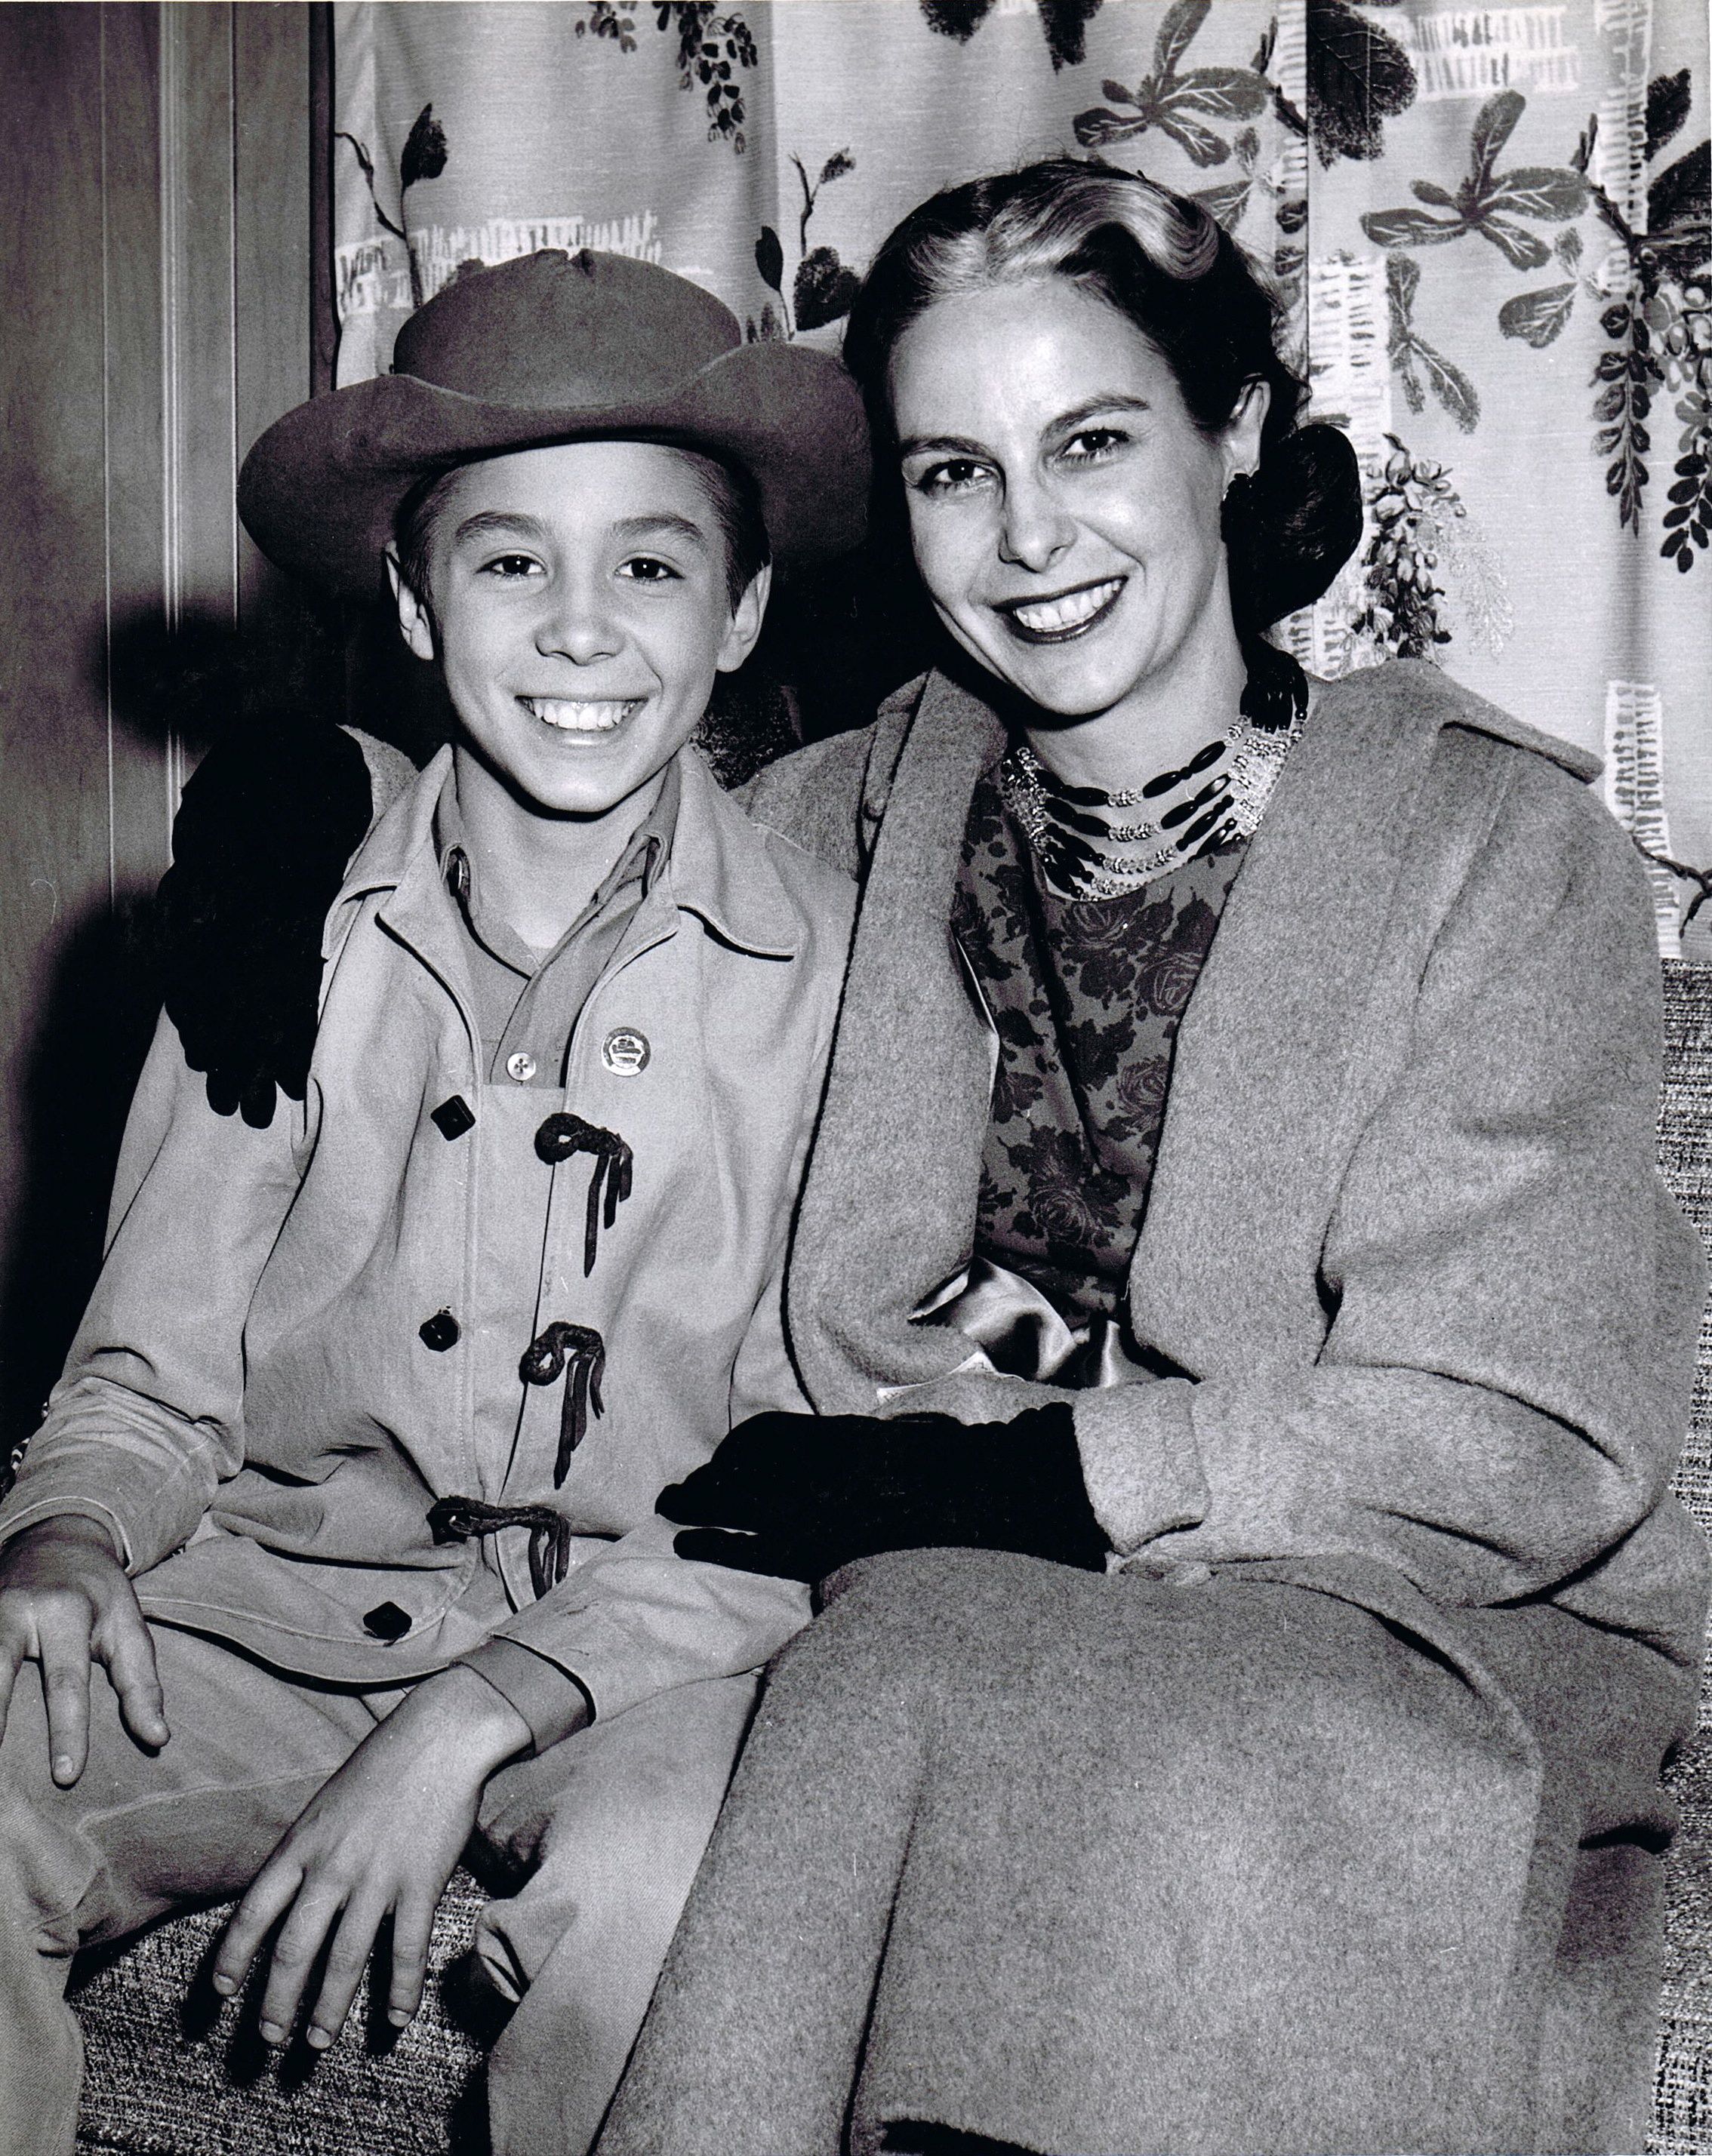 Betty Crawford with her son, Johnny, while he was appearing with Chuck Connors at the Annual Ak-Sar-Ben Rodeo in Omaha, Nebraska (1959).